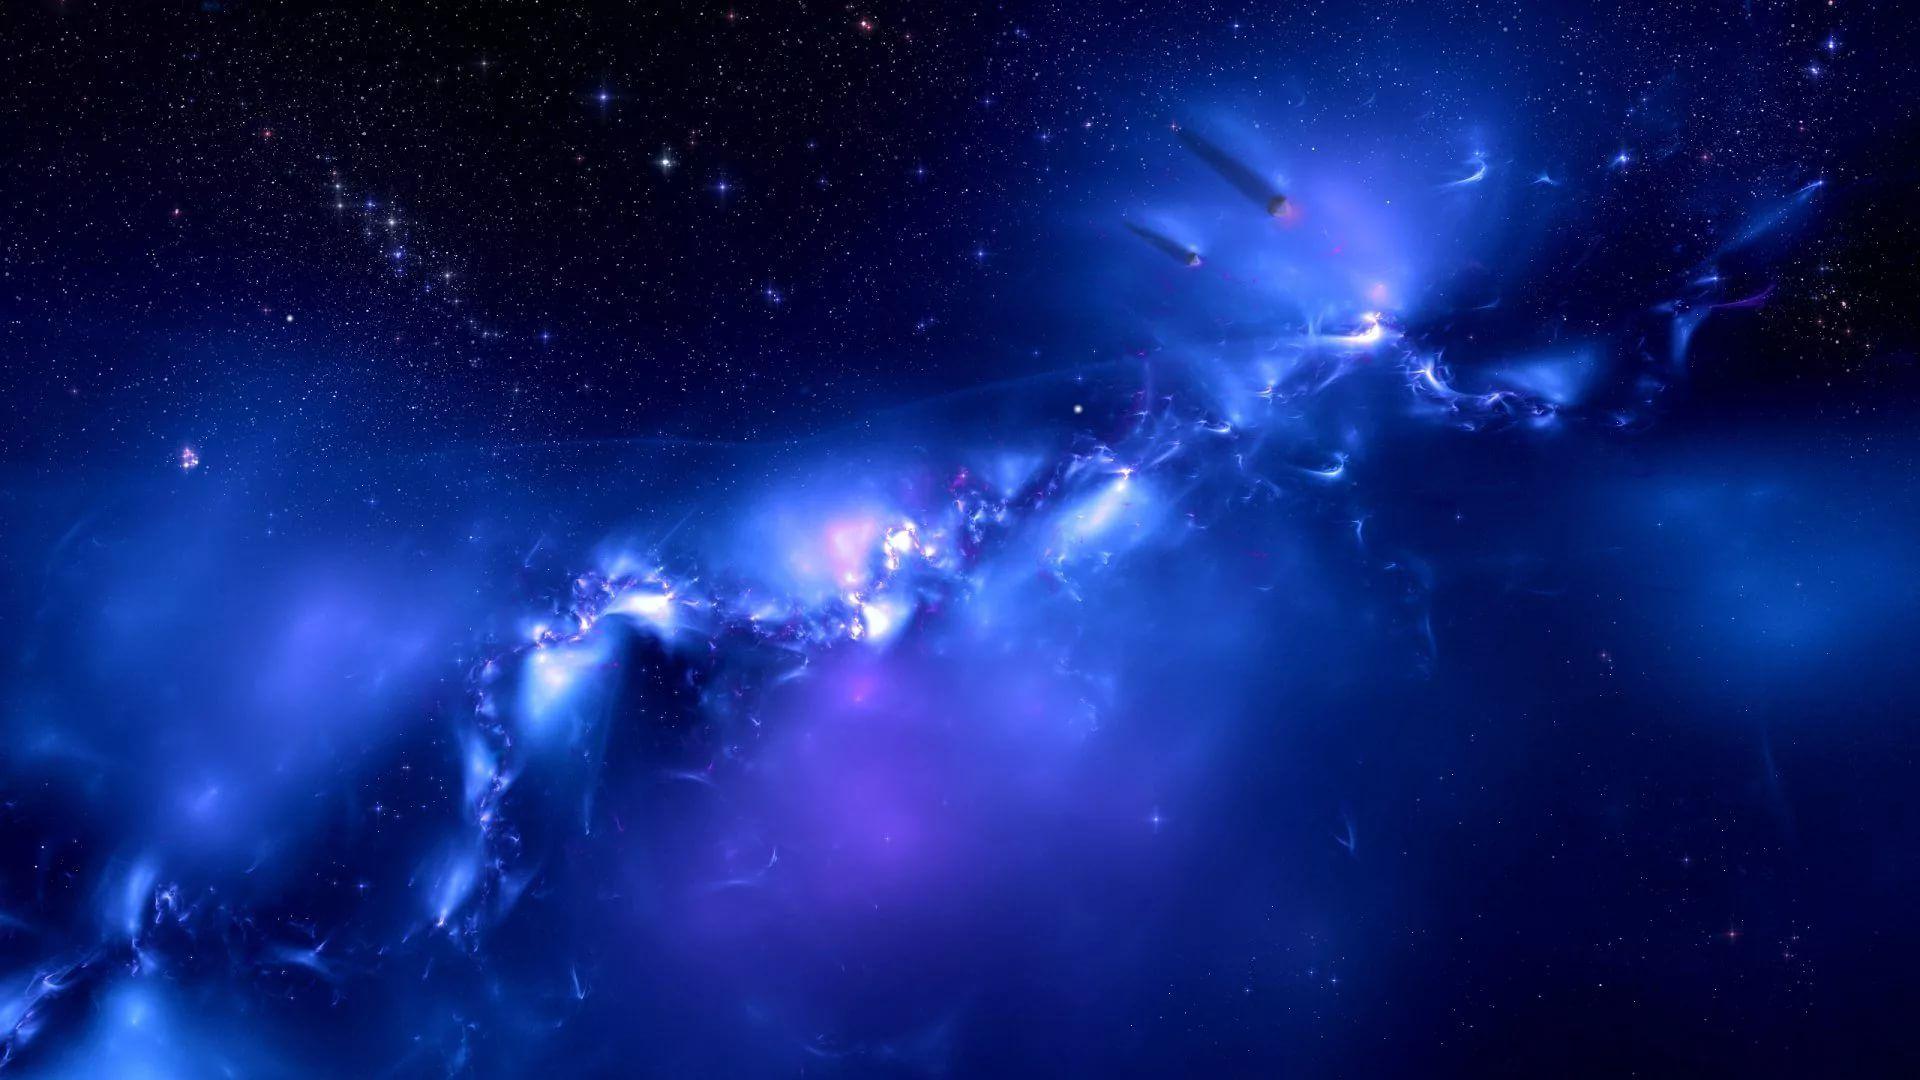 Blue Galaxy Laptop Wallpapers Top Free Blue Galaxy Laptop Backgrounds Wallpaperaccess Wallpapers large enough for multiple screens only. blue galaxy laptop wallpapers top